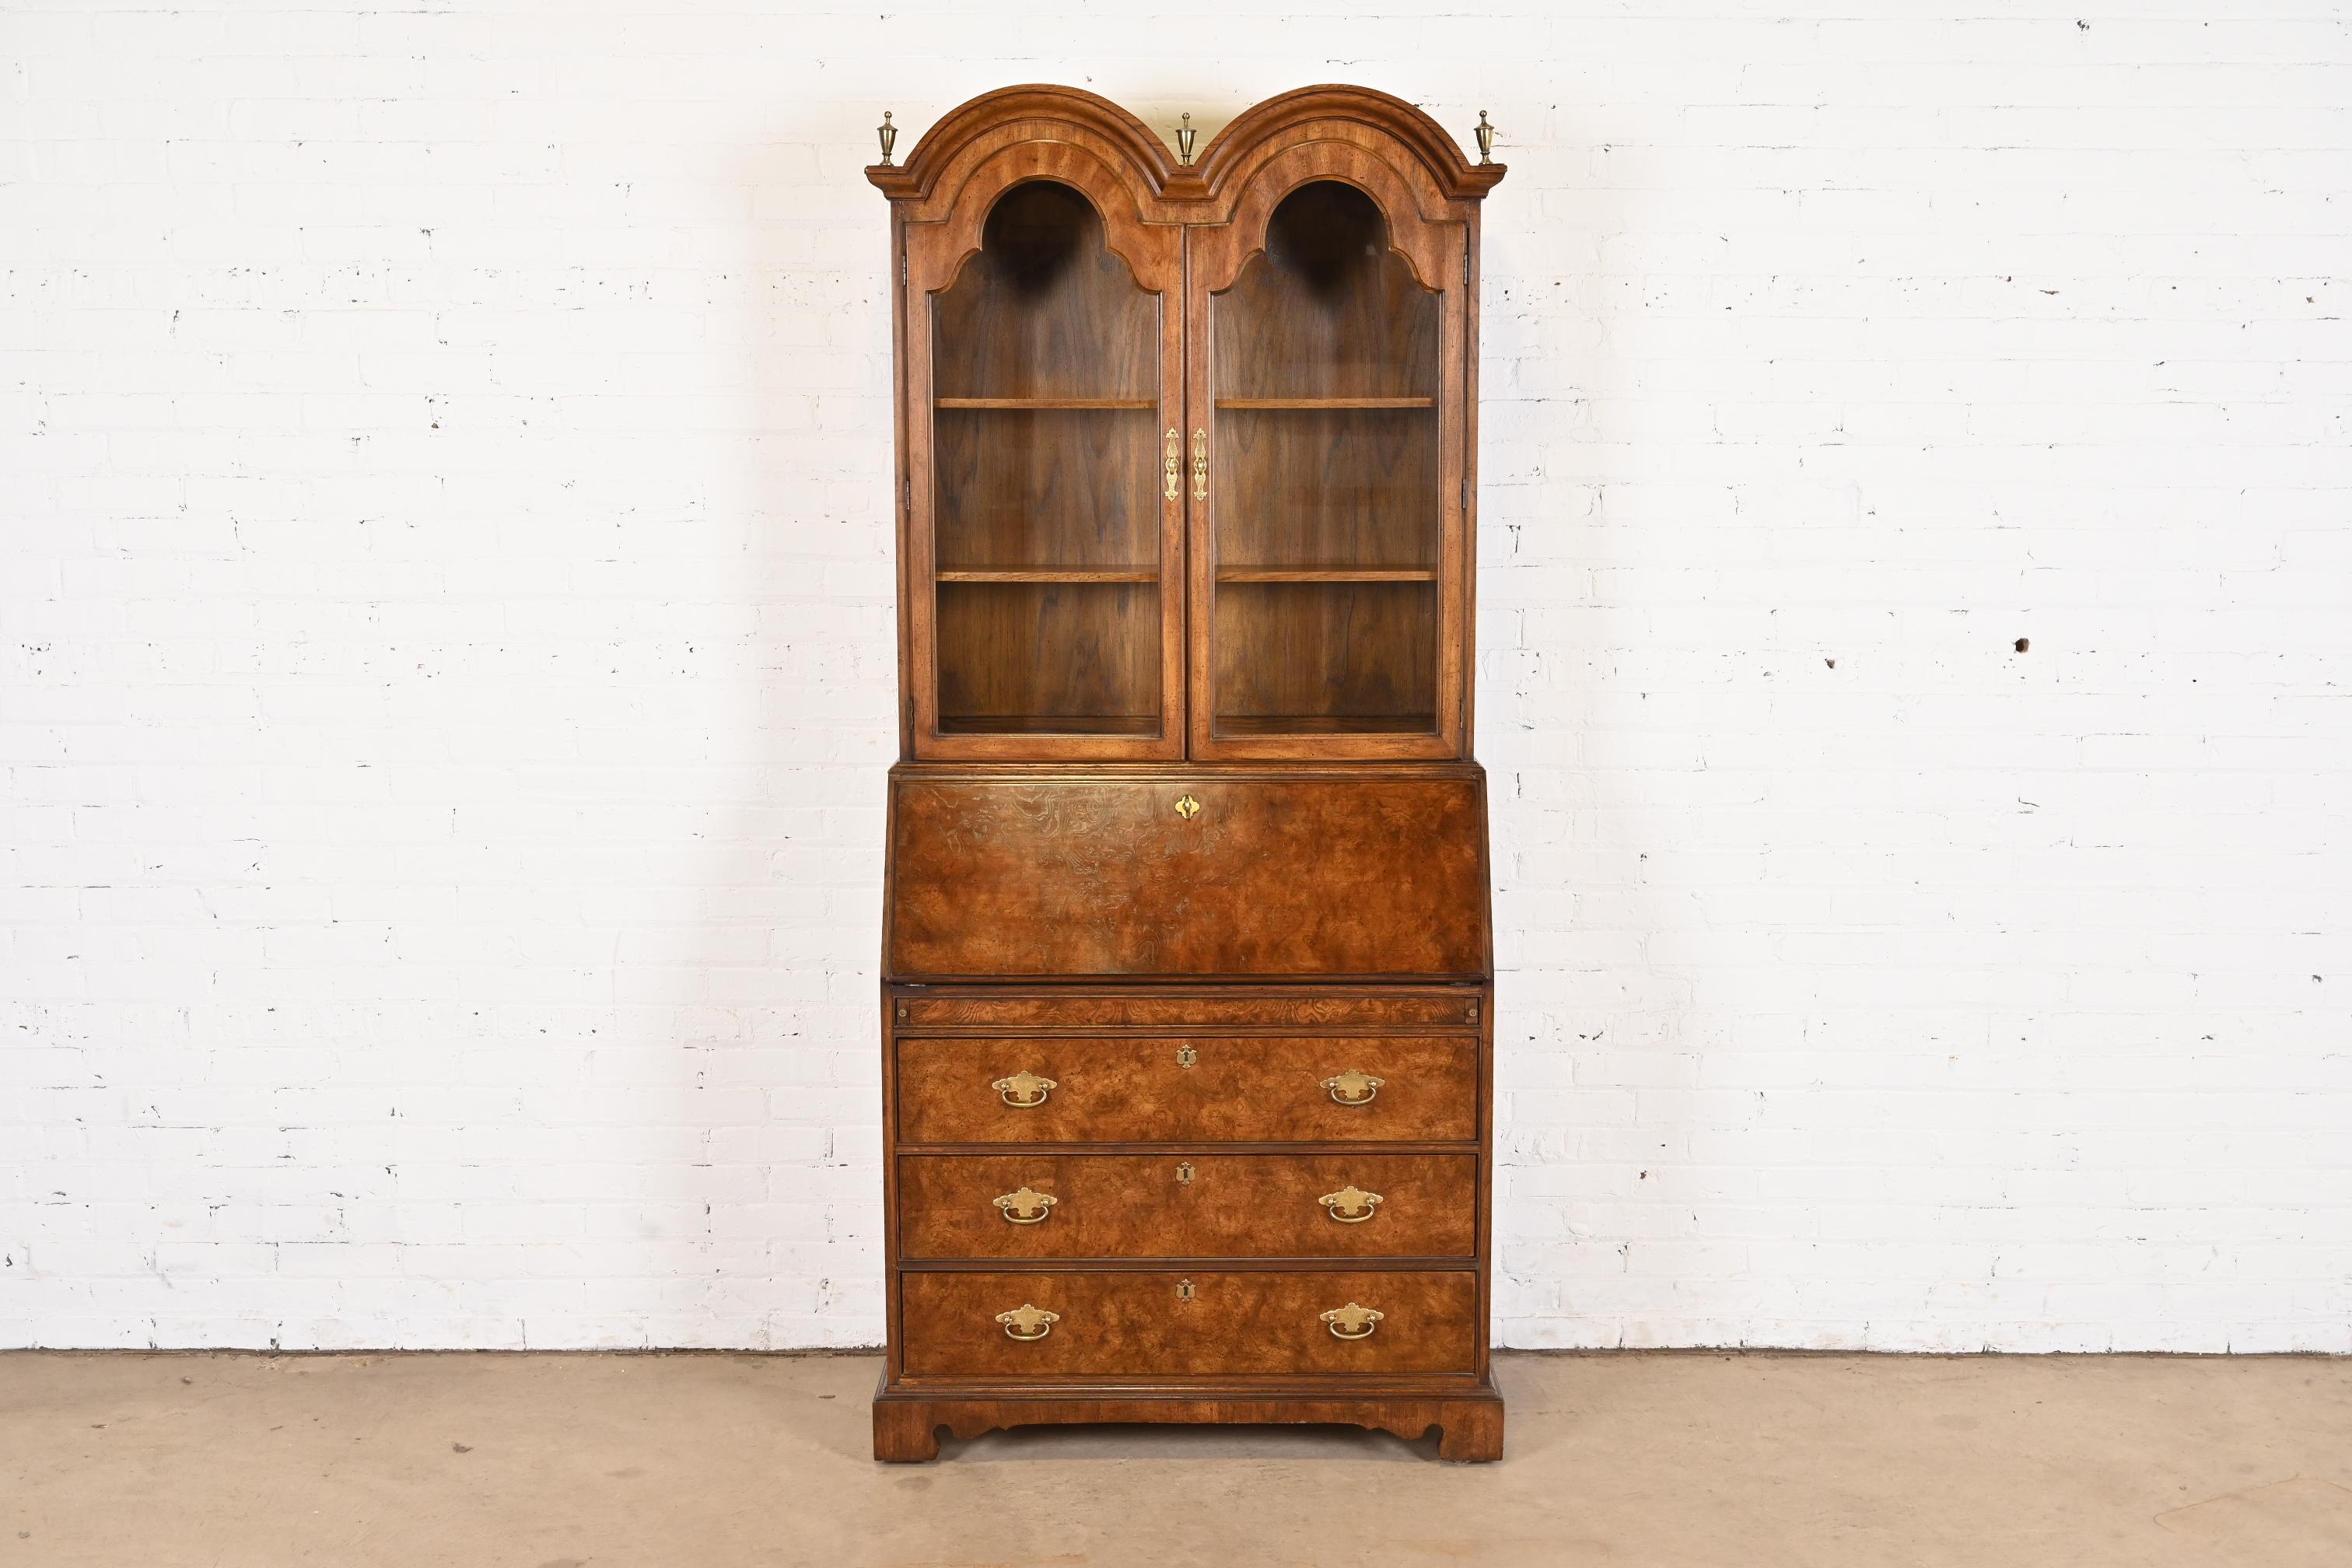 A beautiful Georgian or Queen Anne style bureau with drop front secretary desk and bookcase hutch top

By National Mt. Airy Furniture

USA, Circa 1980s

Gorgeous figured burled walnut, with original brass hardware and glass front doors.

Measures: